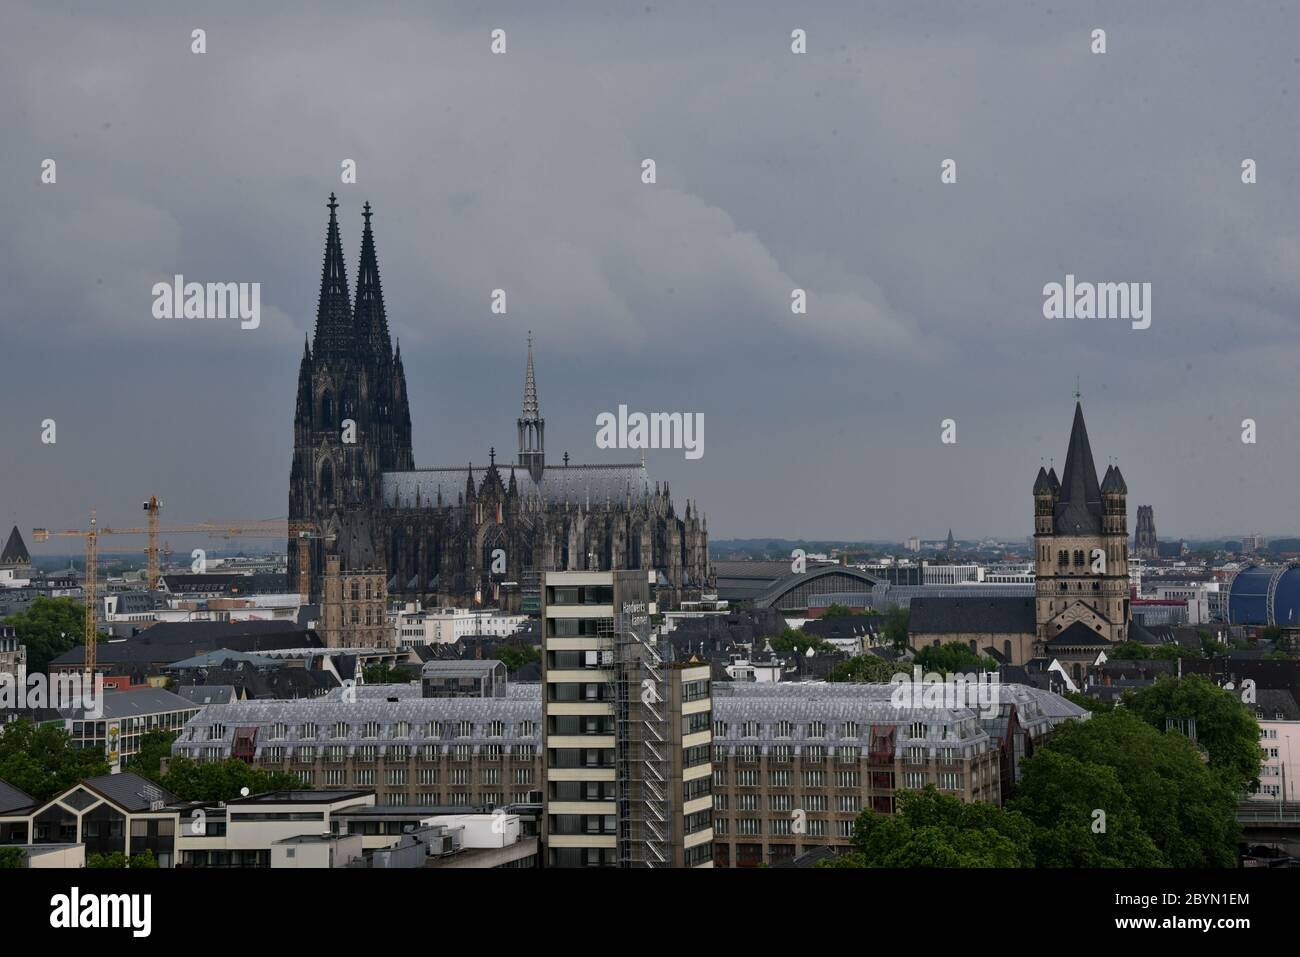 Malakoffturm High Resolution Stock Photography and Images - Alamy